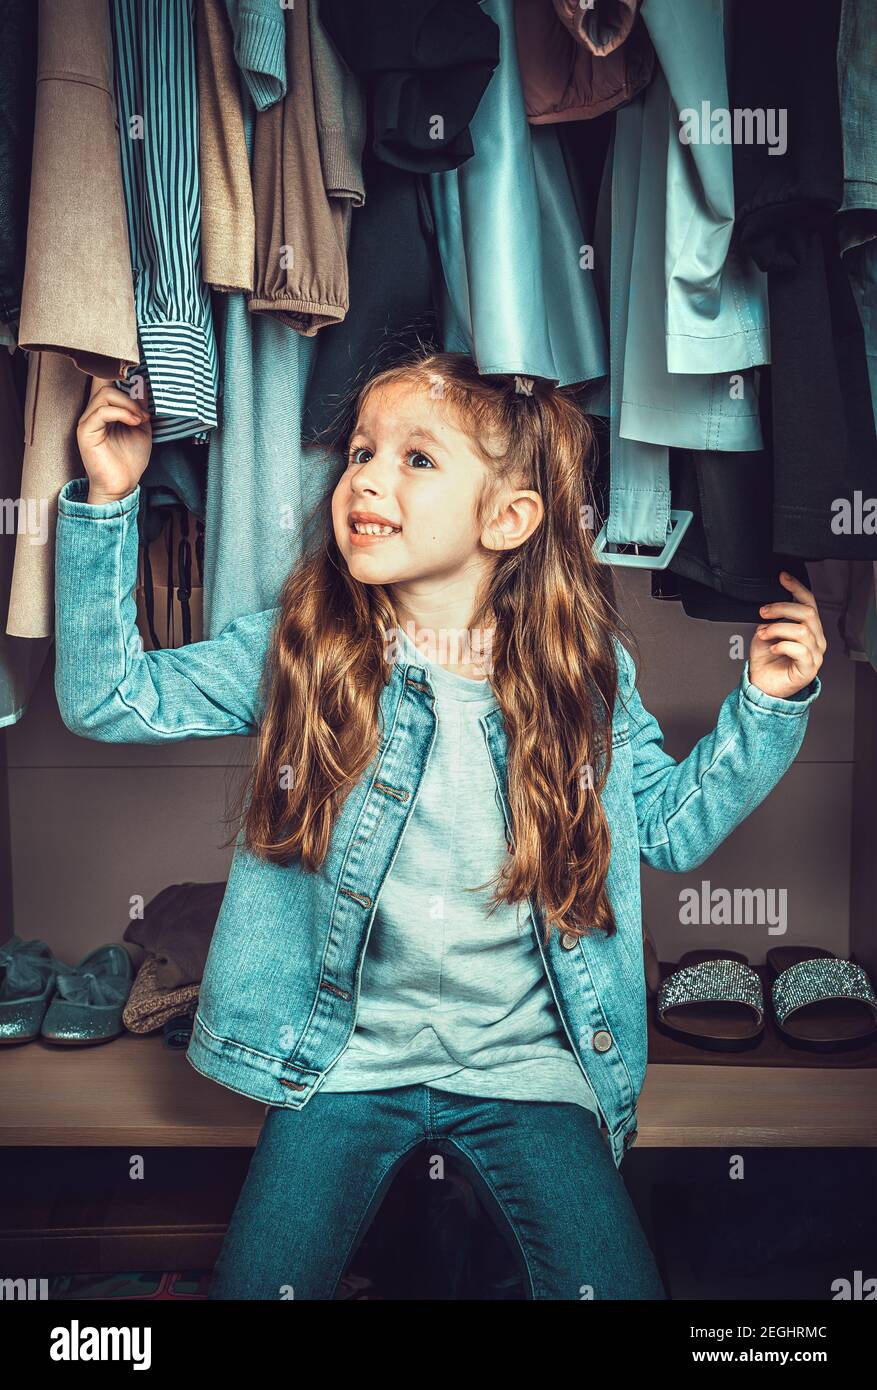 https://c8.alamy.com/comp/2EGHRMC/funny-little-girl-having-fun-in-the-wardrobe-with-clothes-2EGHRMC.jpg